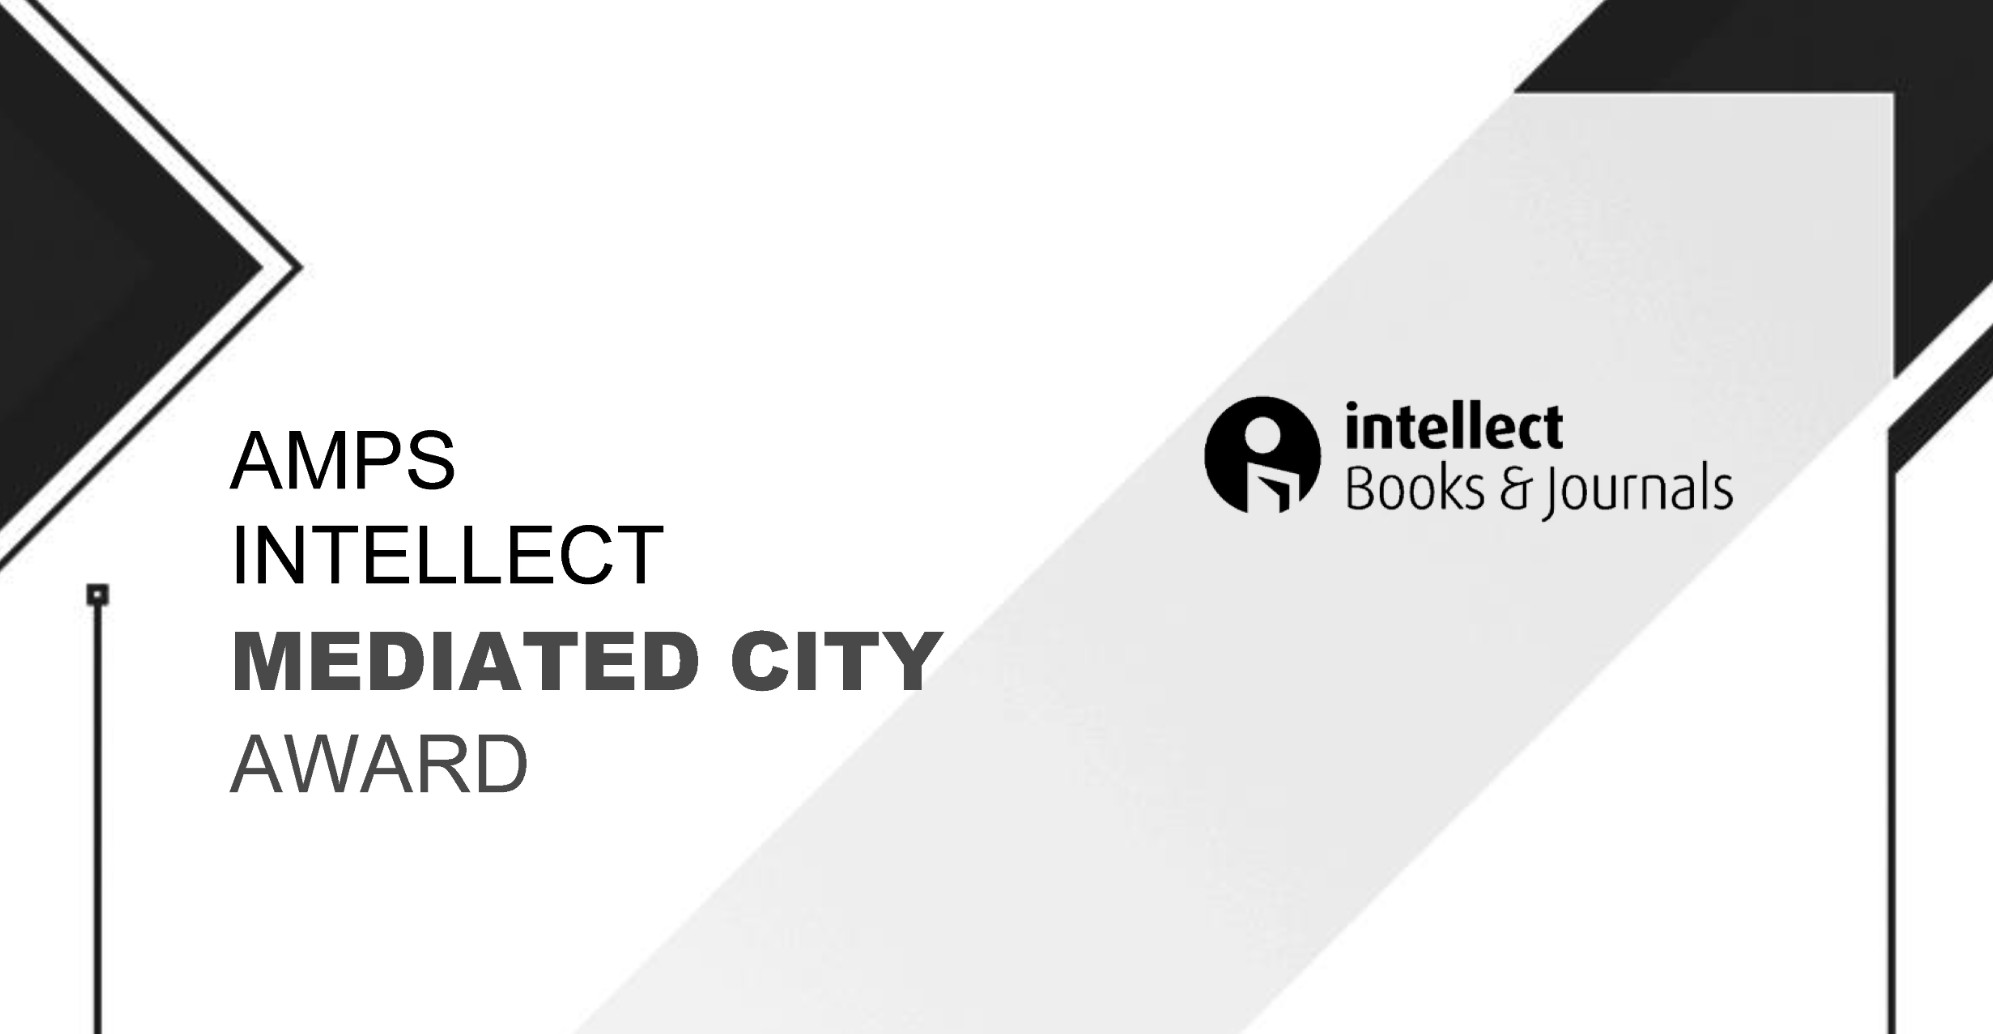 AMPS Intellect Mediated City Award